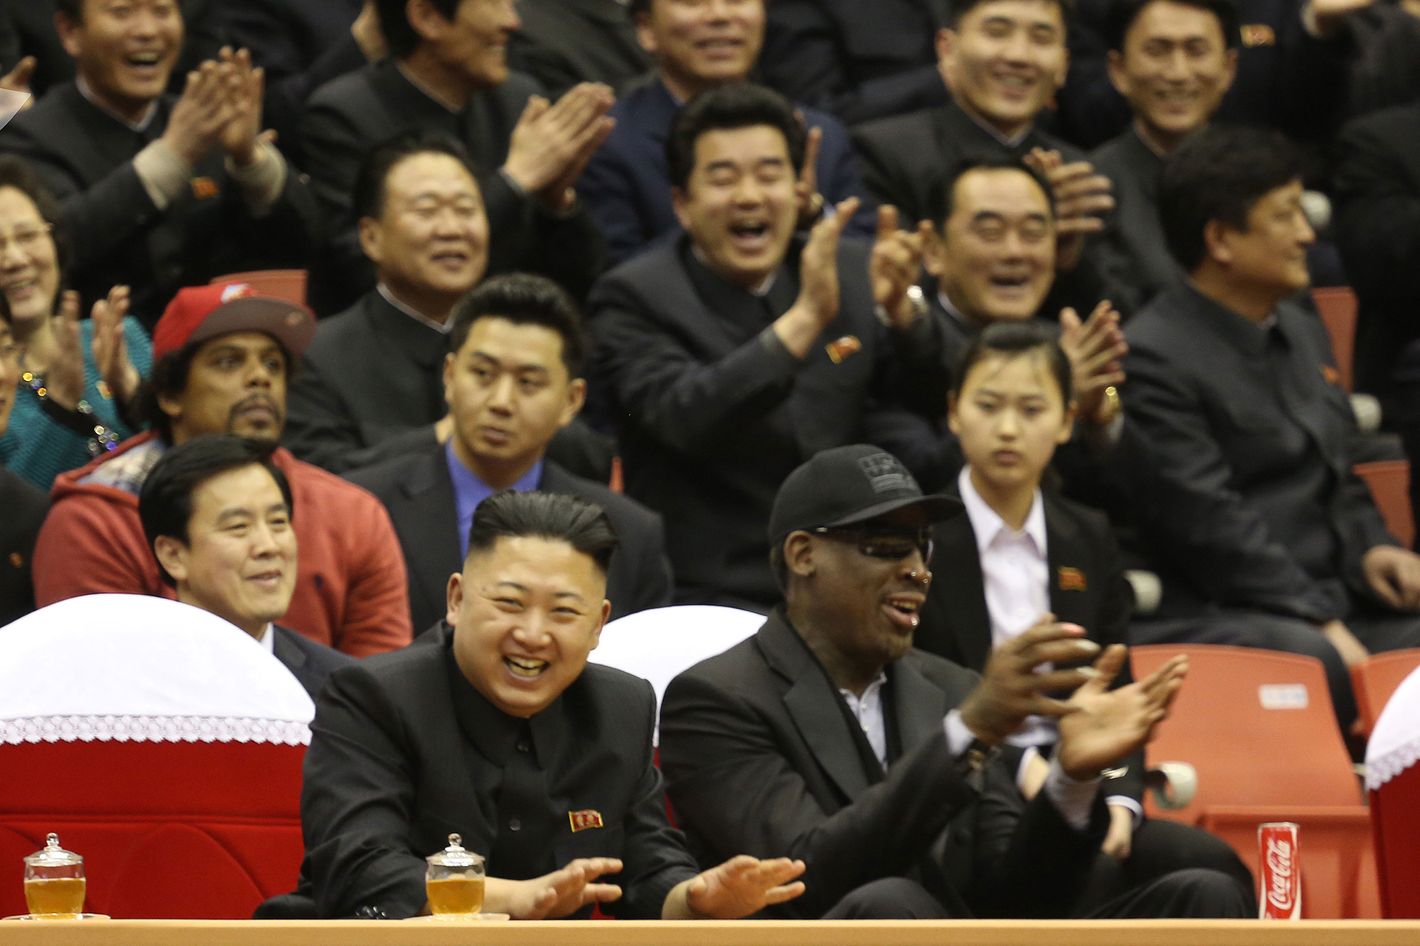 Dennis Rodman blasts Cleveland Cavaliers' owner for refusing to sign him